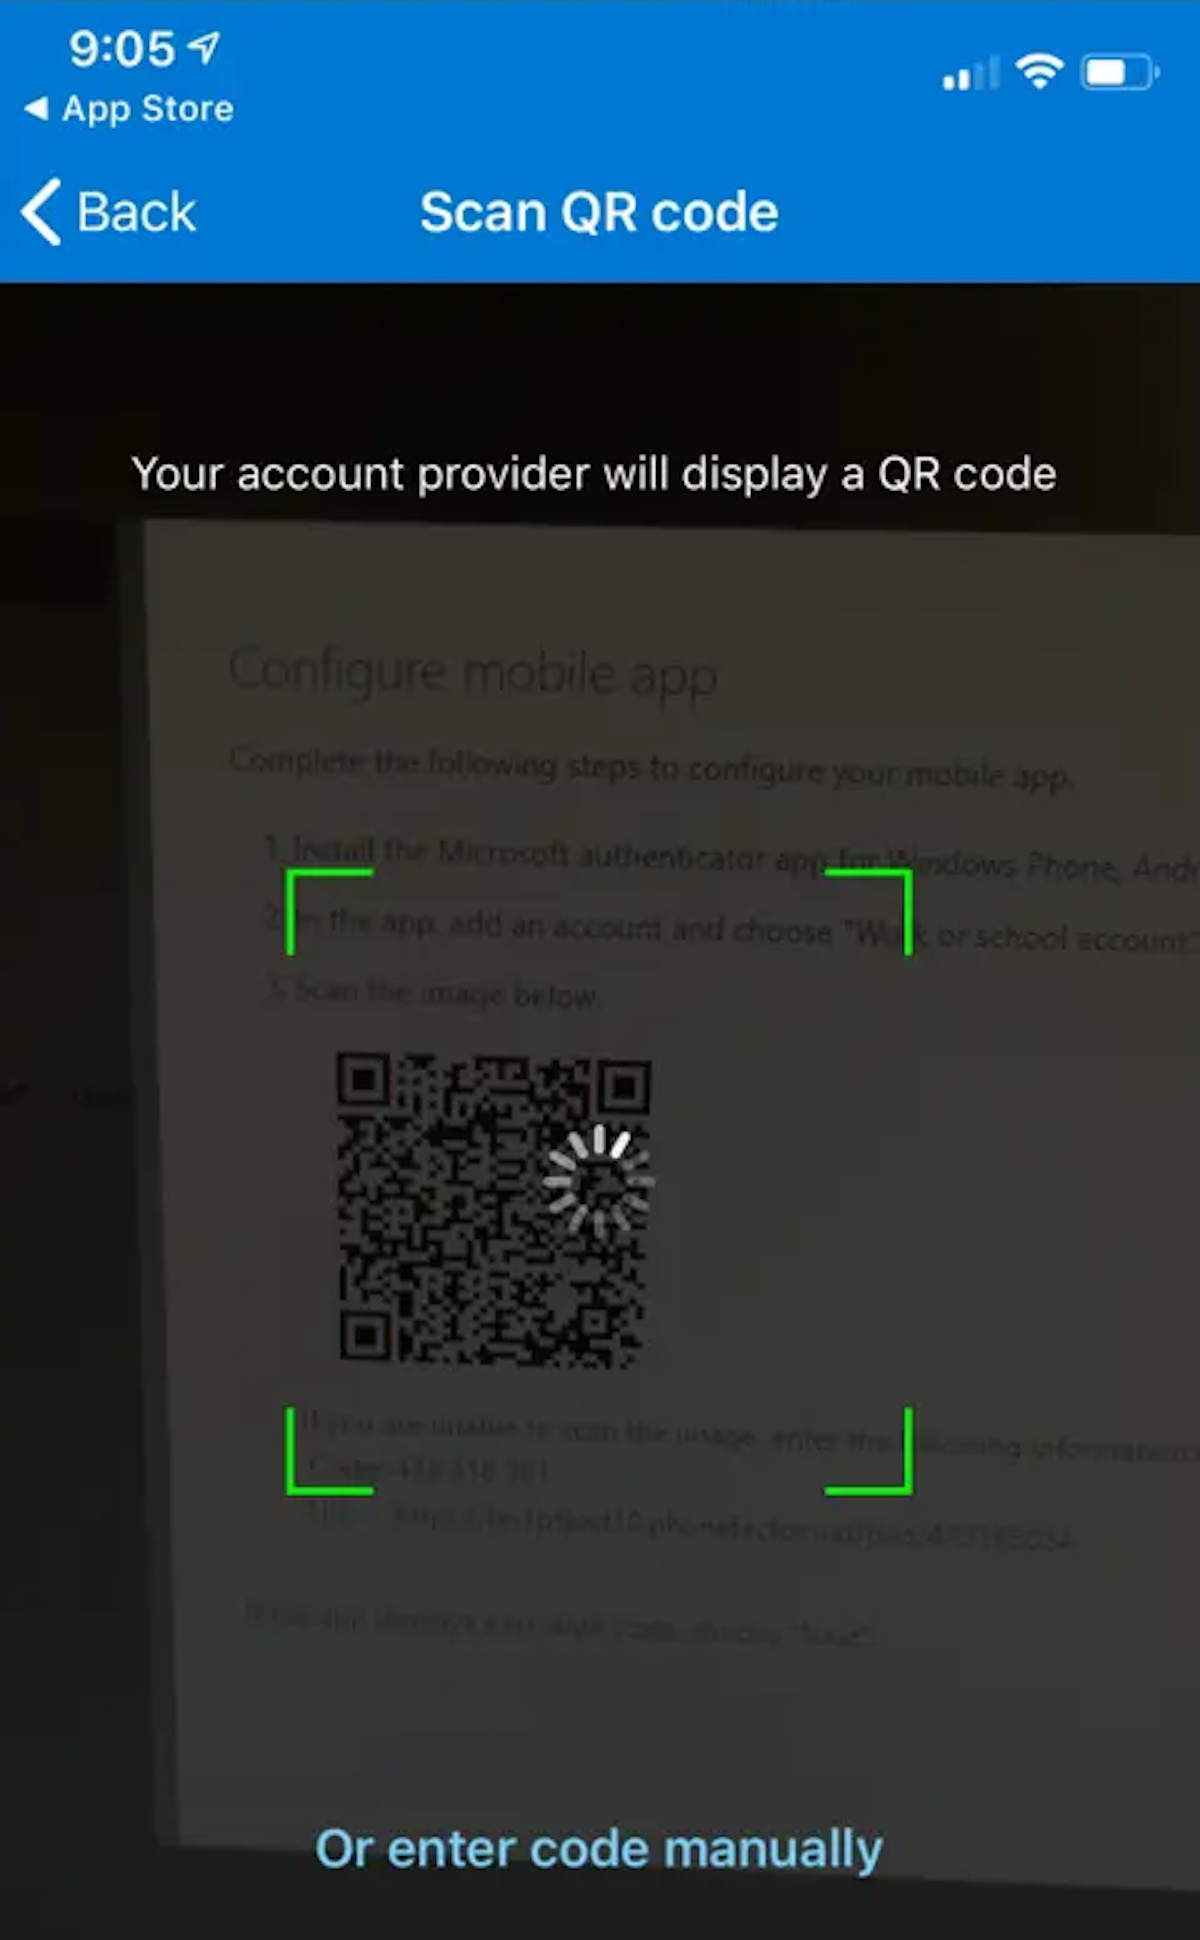 You should now be prompted to scan the QR code that should still be displayed in your browser from step 8.